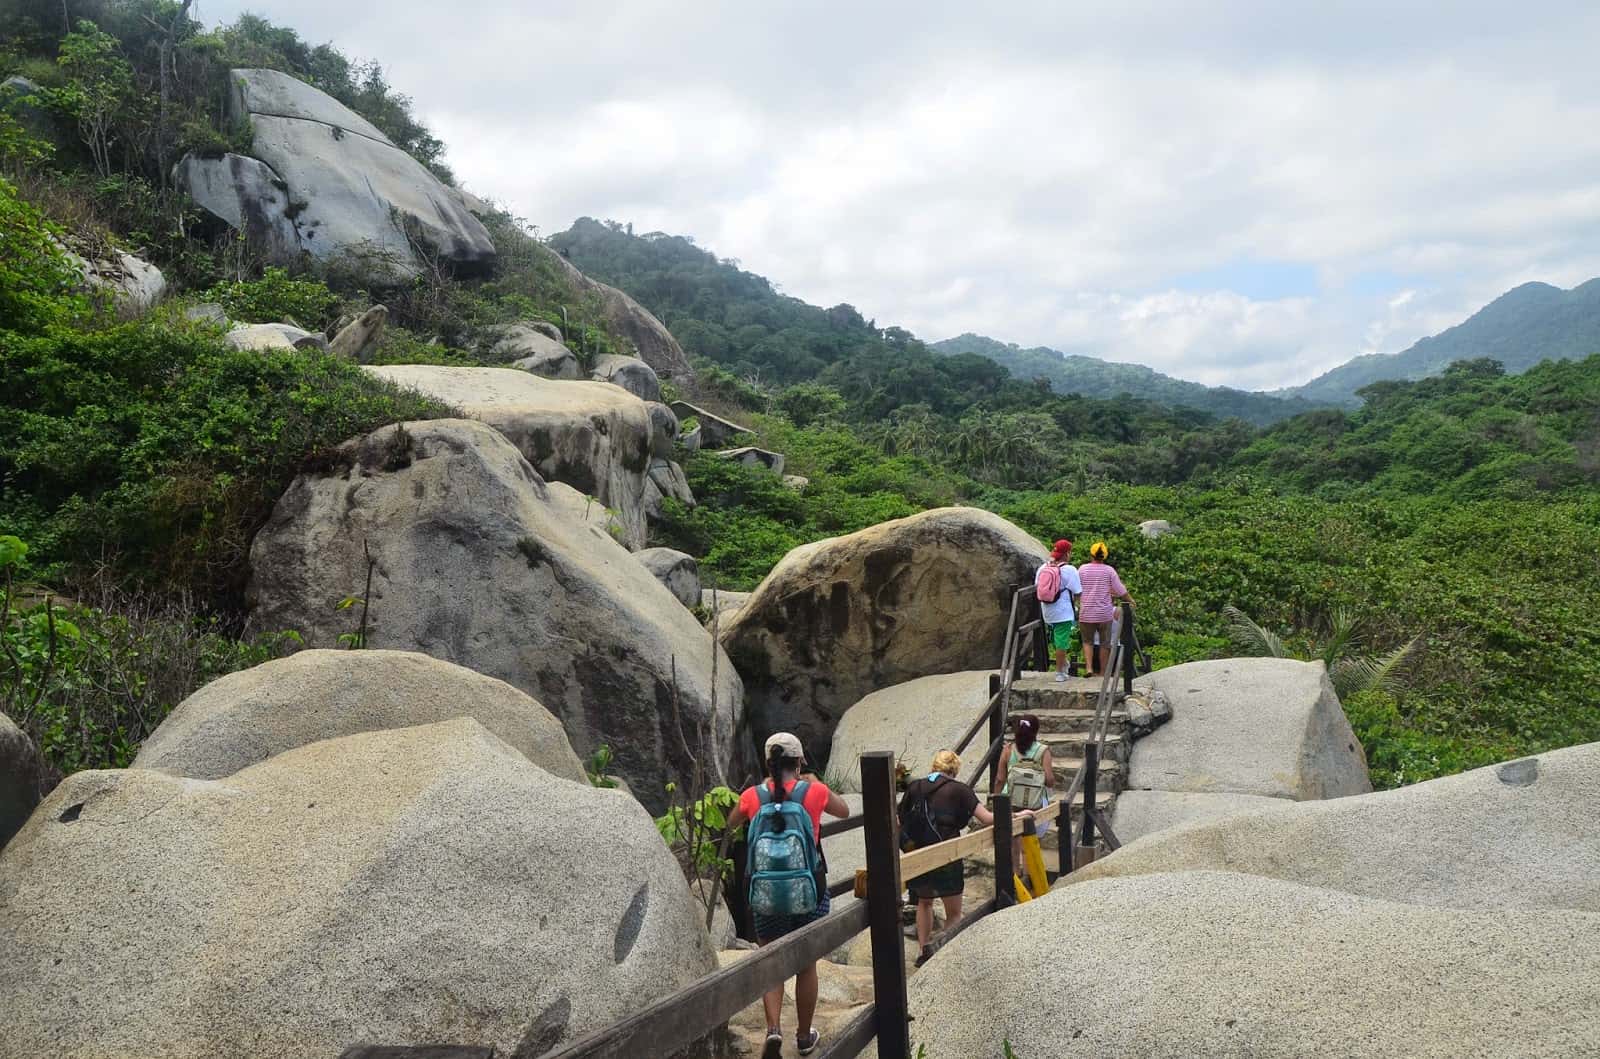 The trail at Tayrona National Park in Colombia